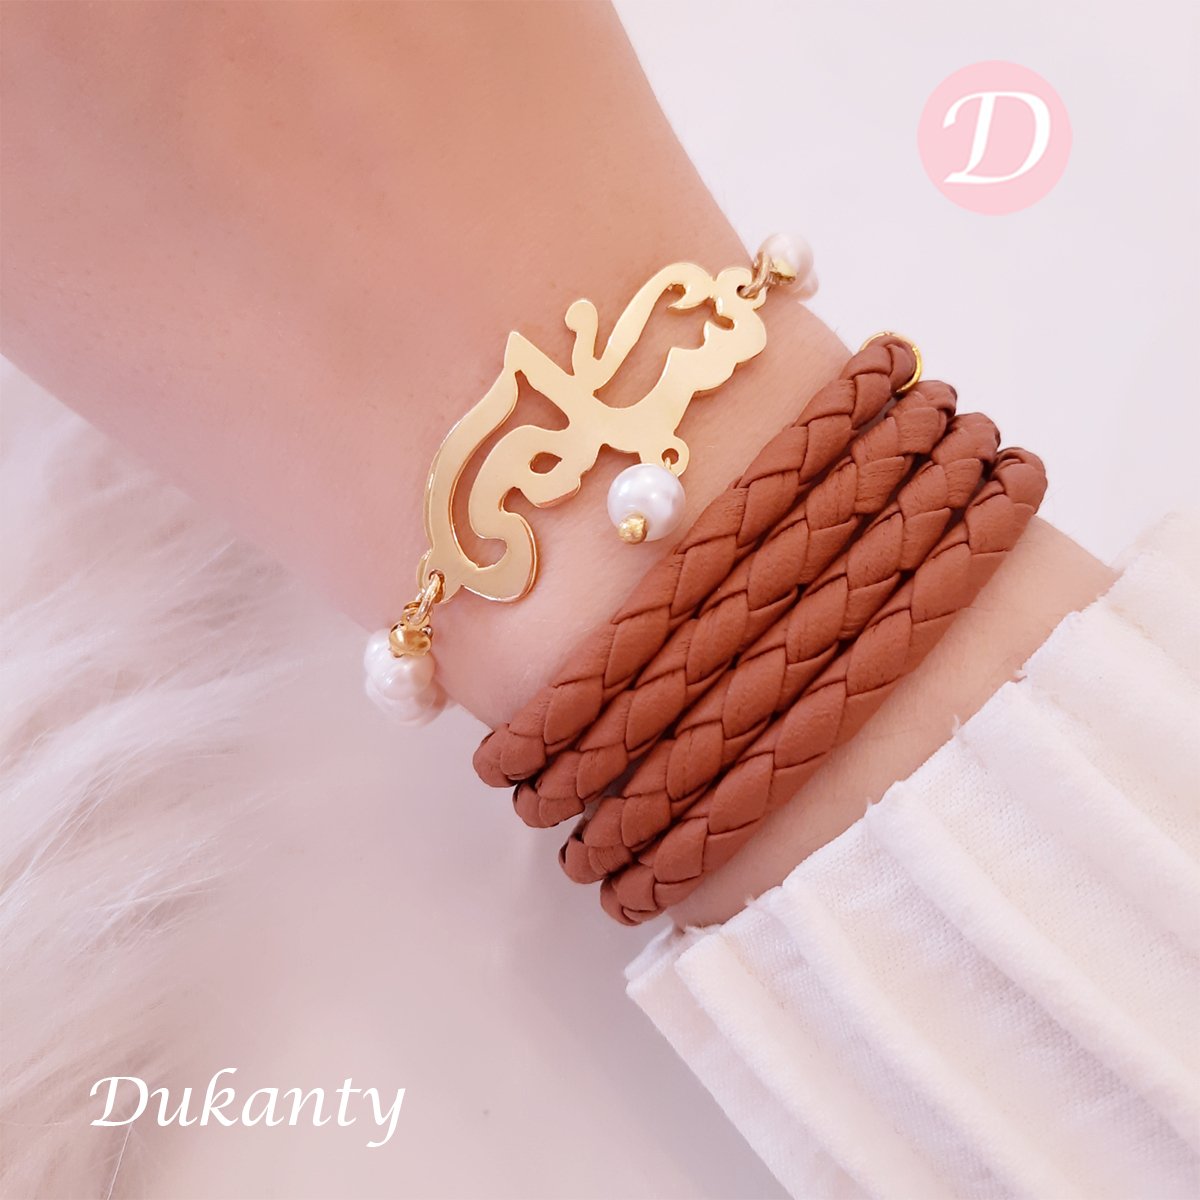 Customized Name with Leather Bracelets Set - Gold Plated